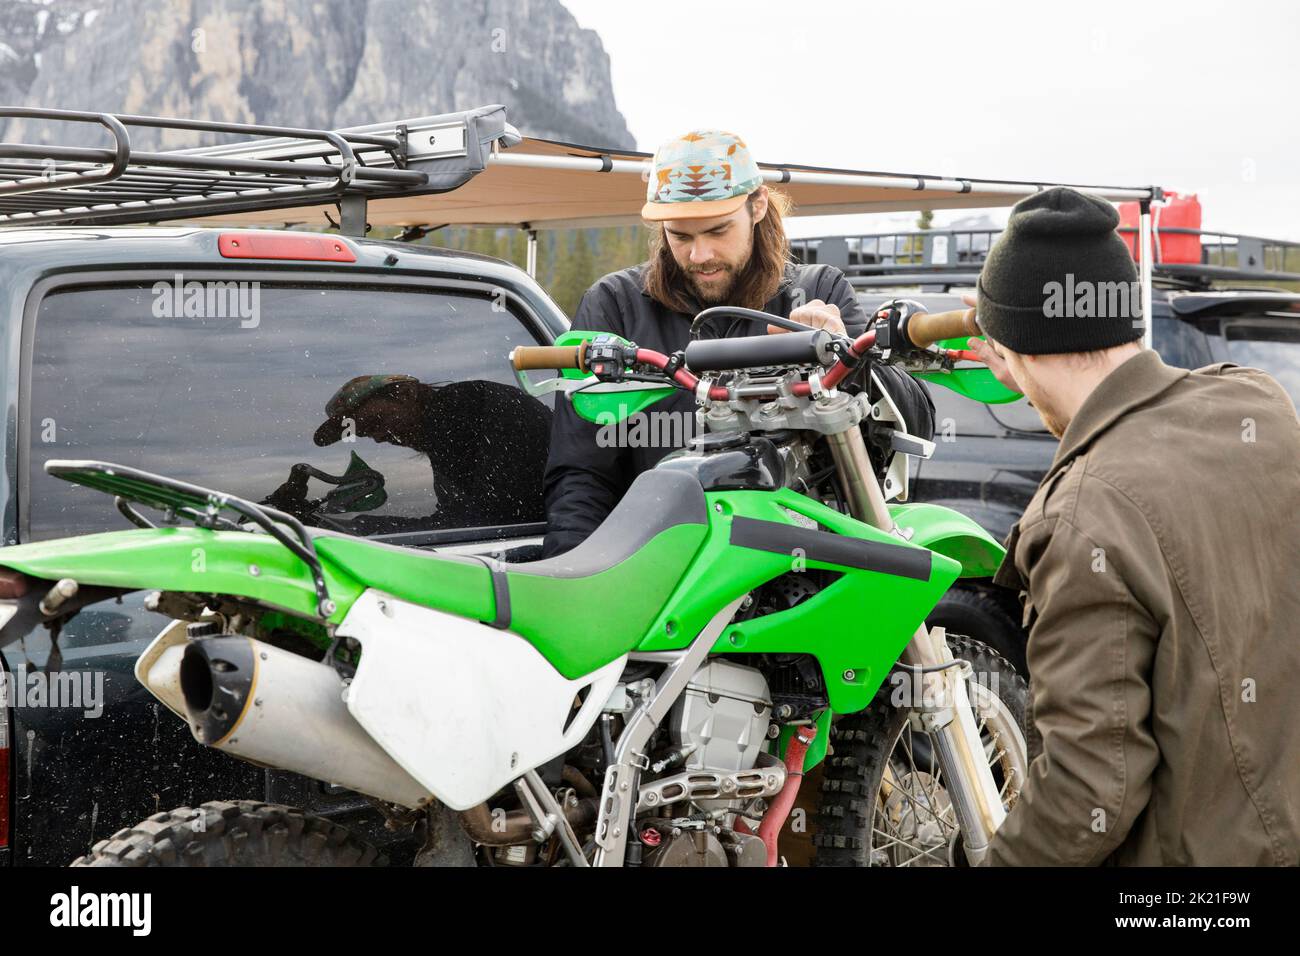 Brothers remove dirt bike from overland SUV Stock Photo